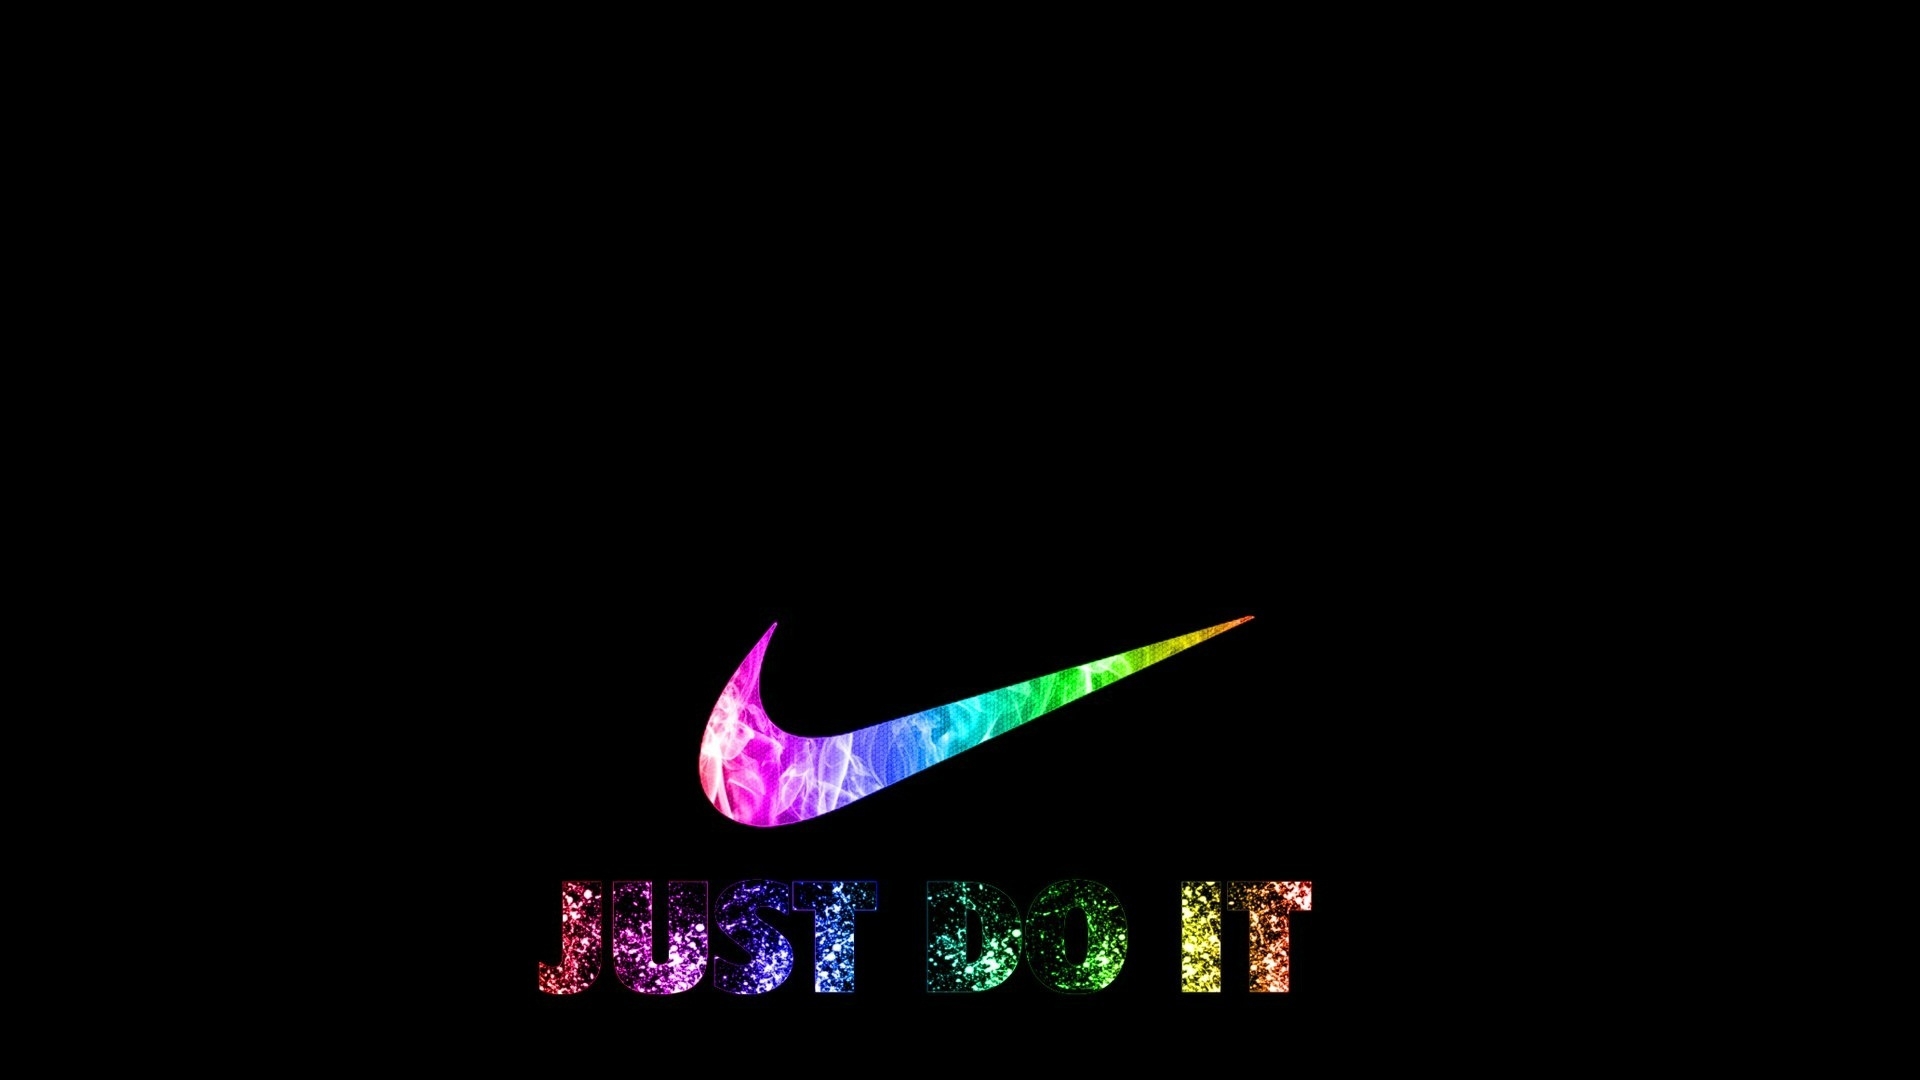 Free Download Multi Color Nike Logo Wallpapers And Images Wallpapers Pictures 19x1080 For Your Desktop Mobile Tablet Explore 49 Nike Wallpapers For Girls Nike Shoes Wallpaper Nike Wallpaper Blue Nike Wallpaper